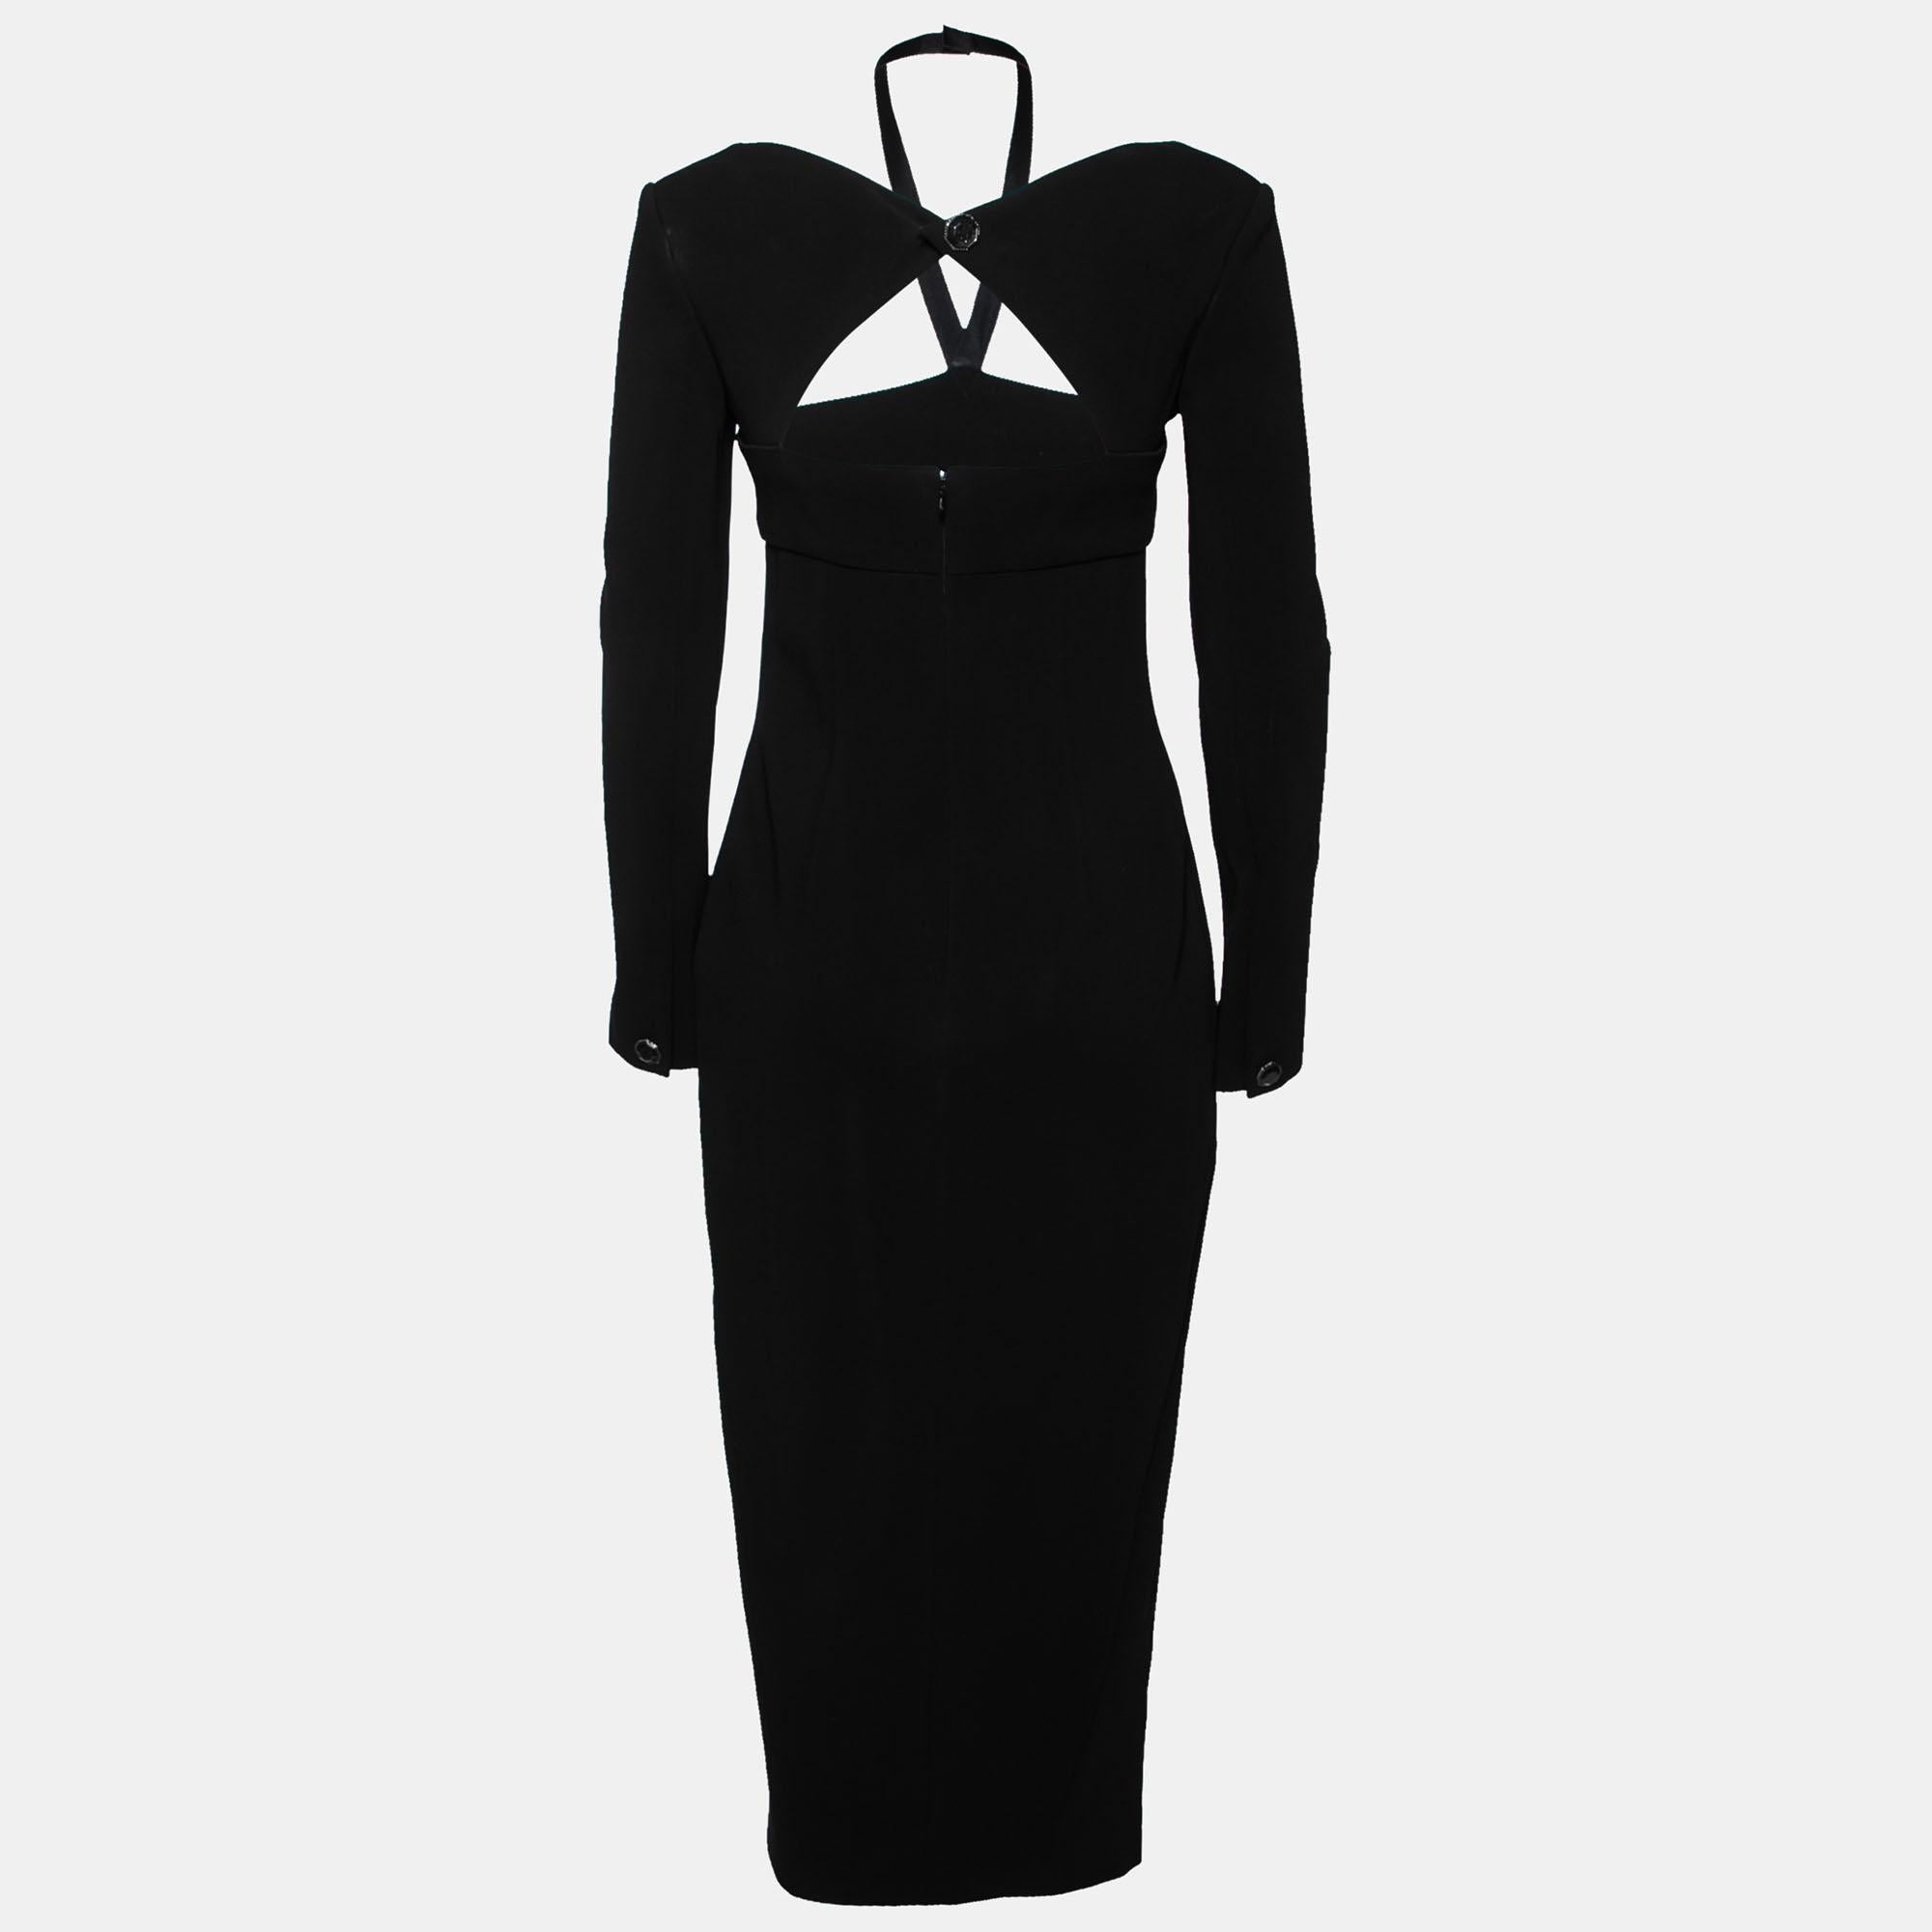 Show your love for understated fashion by donning this elegant dress from Chanel. It comes draped in fine materials with a midi-length and long sleeves. The black dress is truly flattering and has a cut-out detail at the back. It will look wonderful